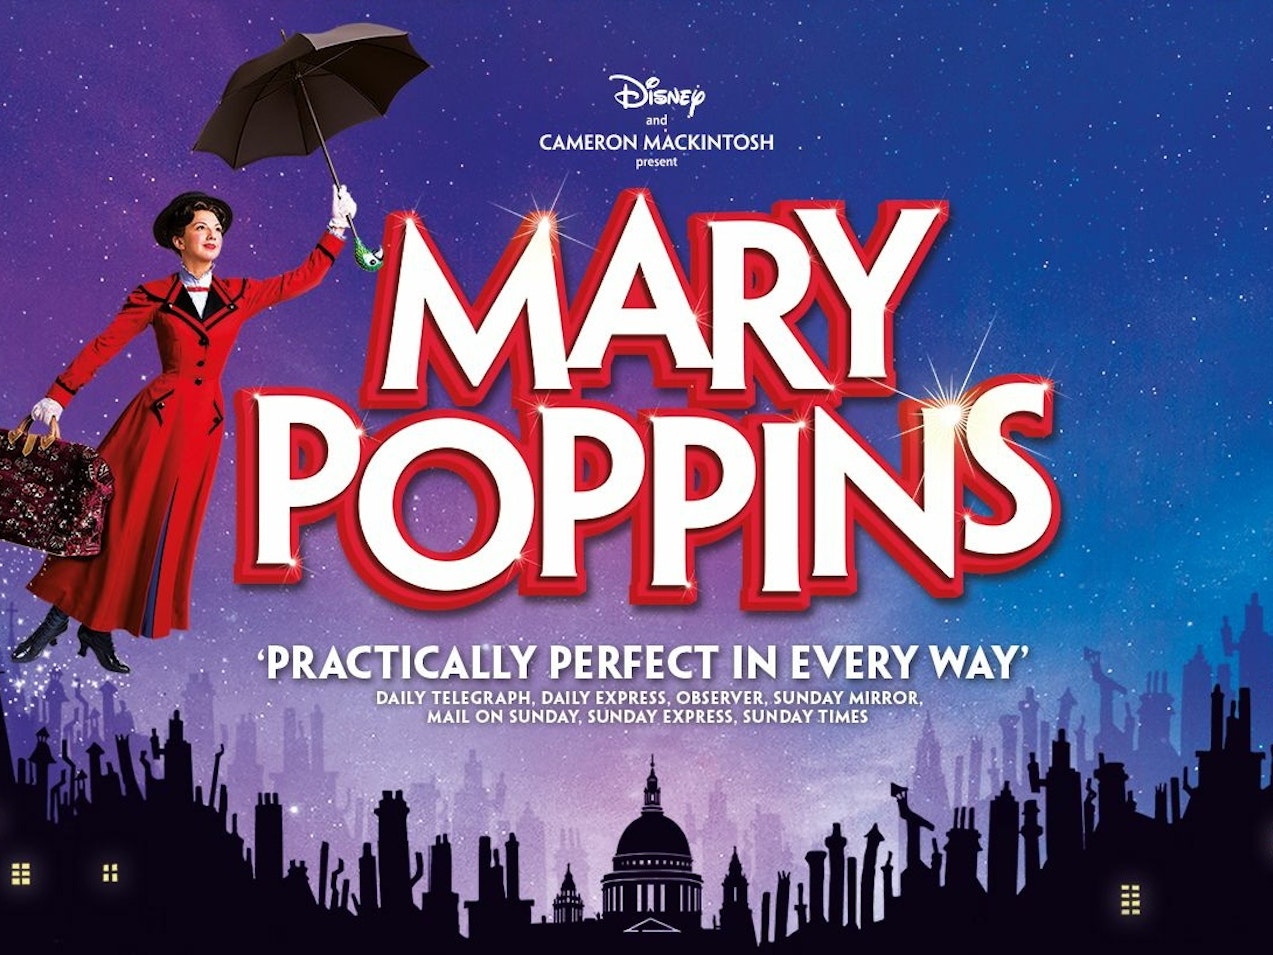 Mary Poppins Musical Tour Schedule 2022 Mary Poppins Tour Dates & Tickets 2022 | Ents24